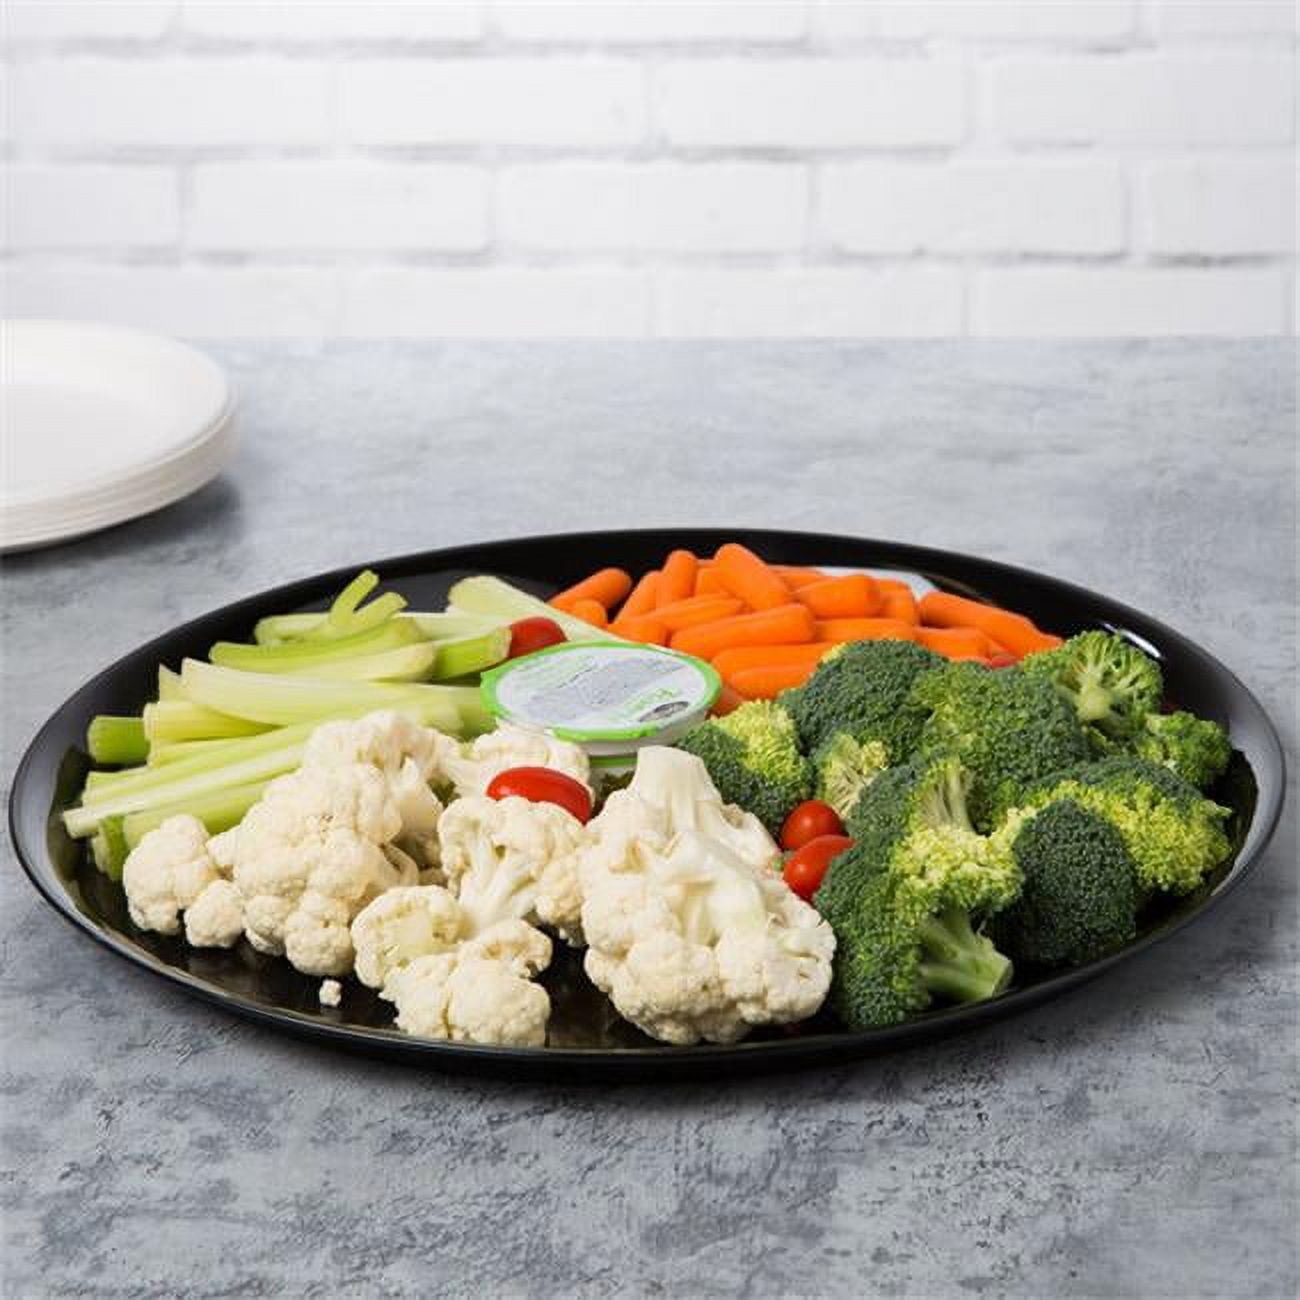 A916bl25 16 In. Checkmate Black Round Catering Tray - Case Of 25